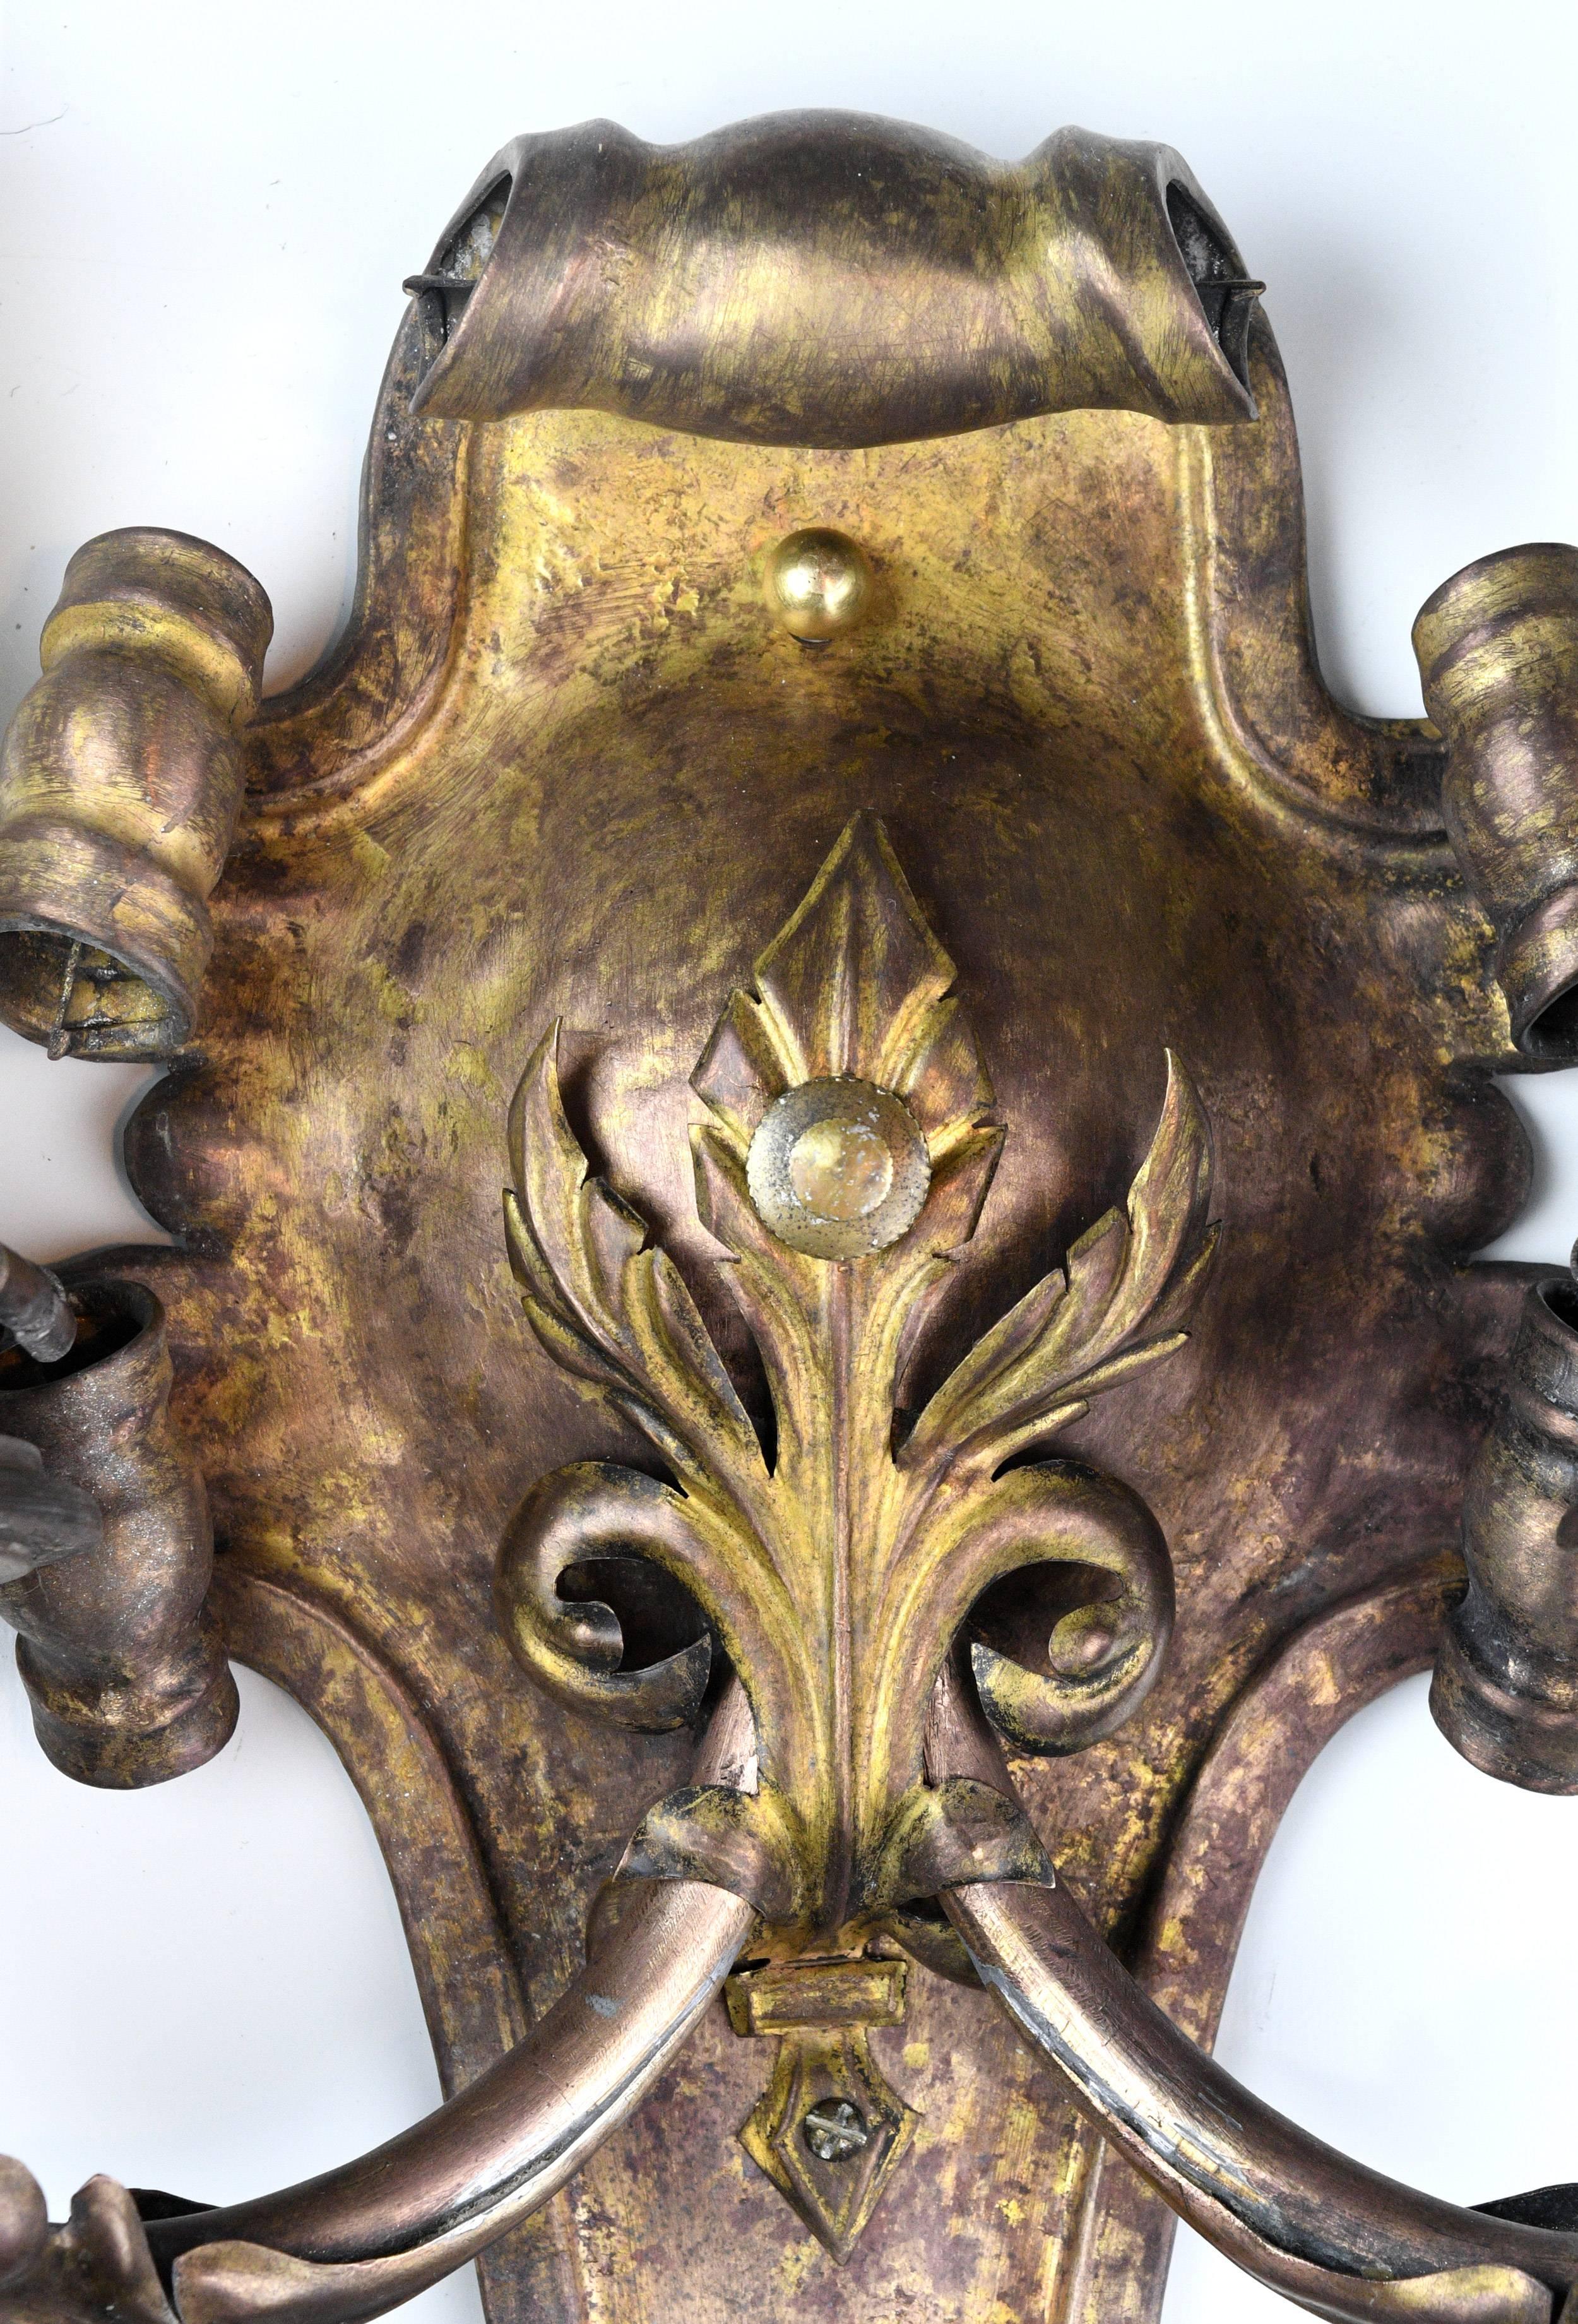 This gorgeous brass two candle Rococo sconce is laden with ribbon-like curls throughout. The curving, unfurling lines give the fixture a natural, organic feel, and the richly patina-ed brass adds to the old world charm. If you are looking for an